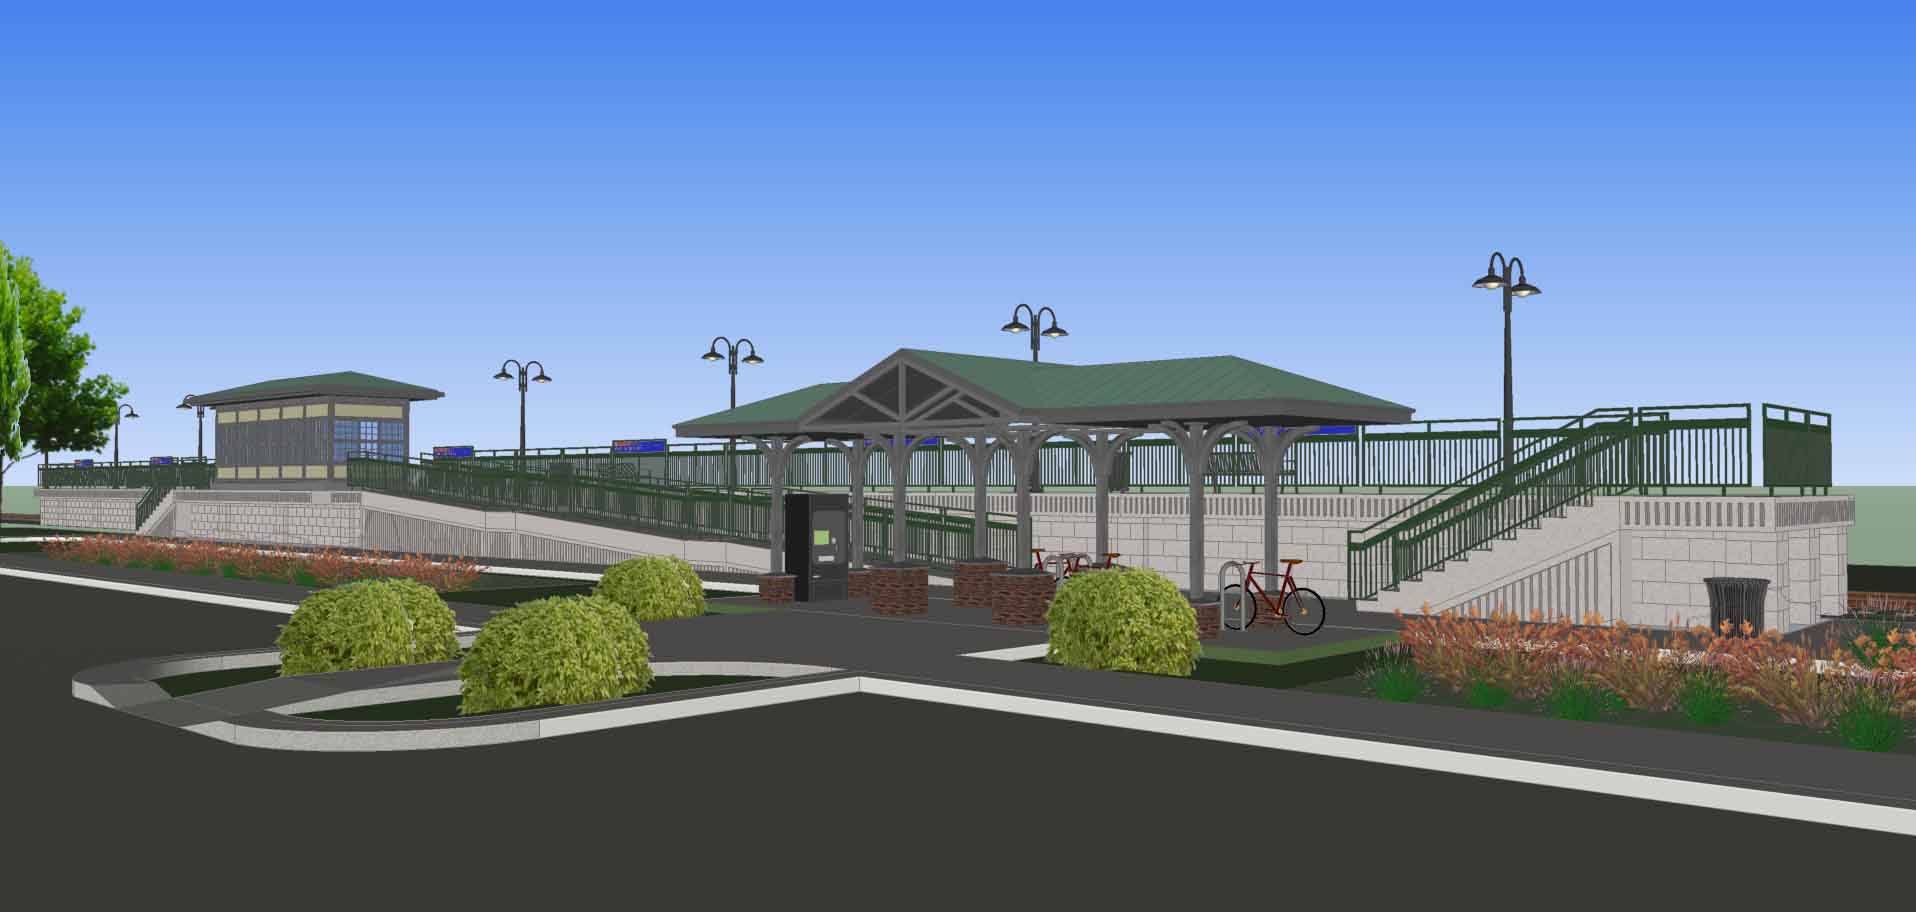 Rendering of 9th Street Station in Lansdale